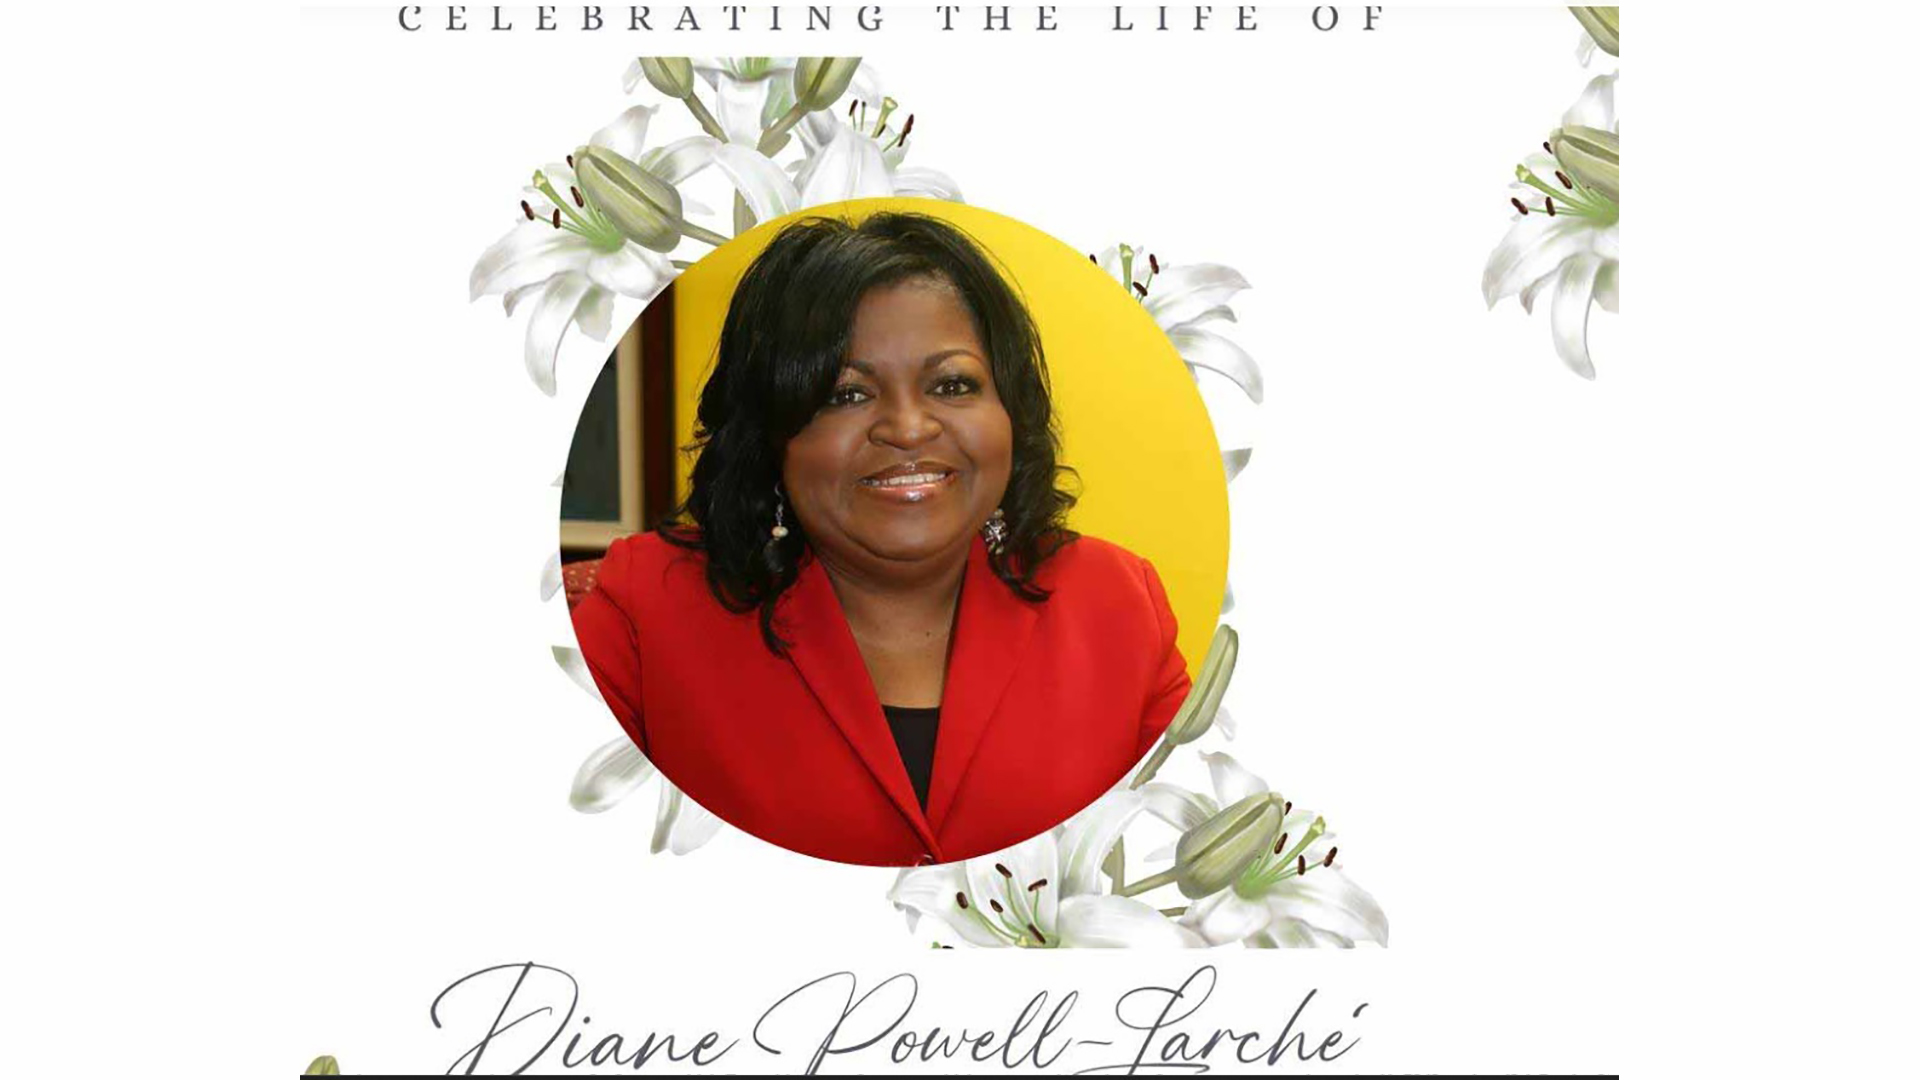 Black Press mourns the loss of media expert Diane Powell-Larché